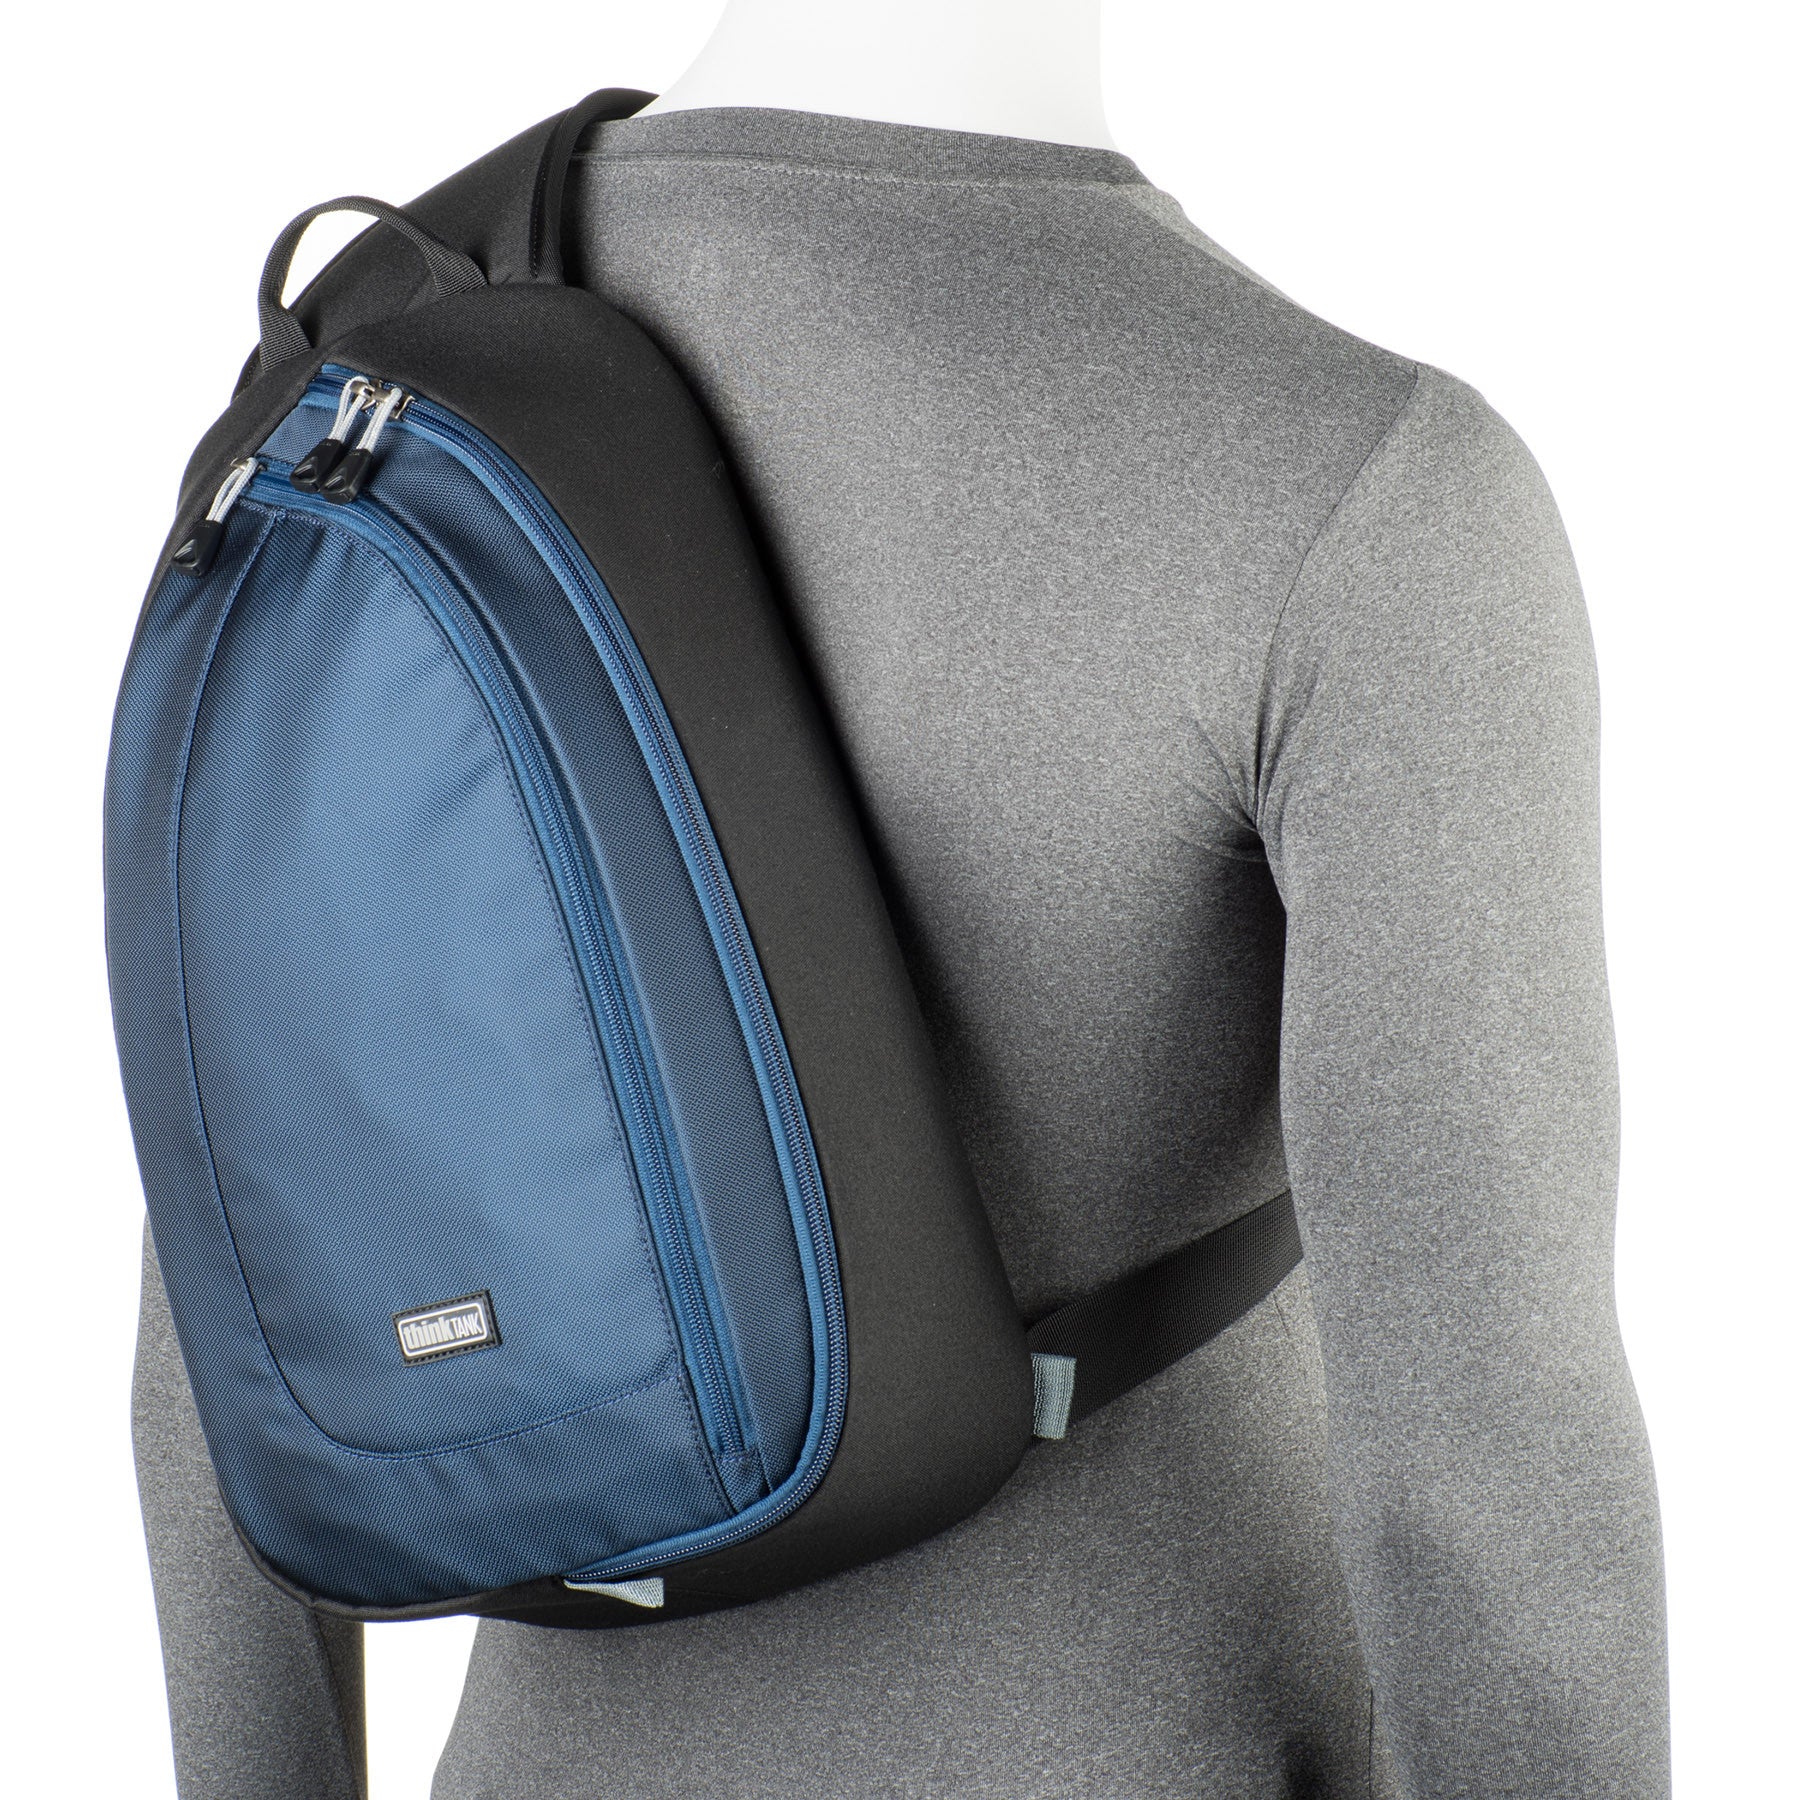 Slim, contoured, body-conforming design with a wide shoulder strap provides a very comfortable fit